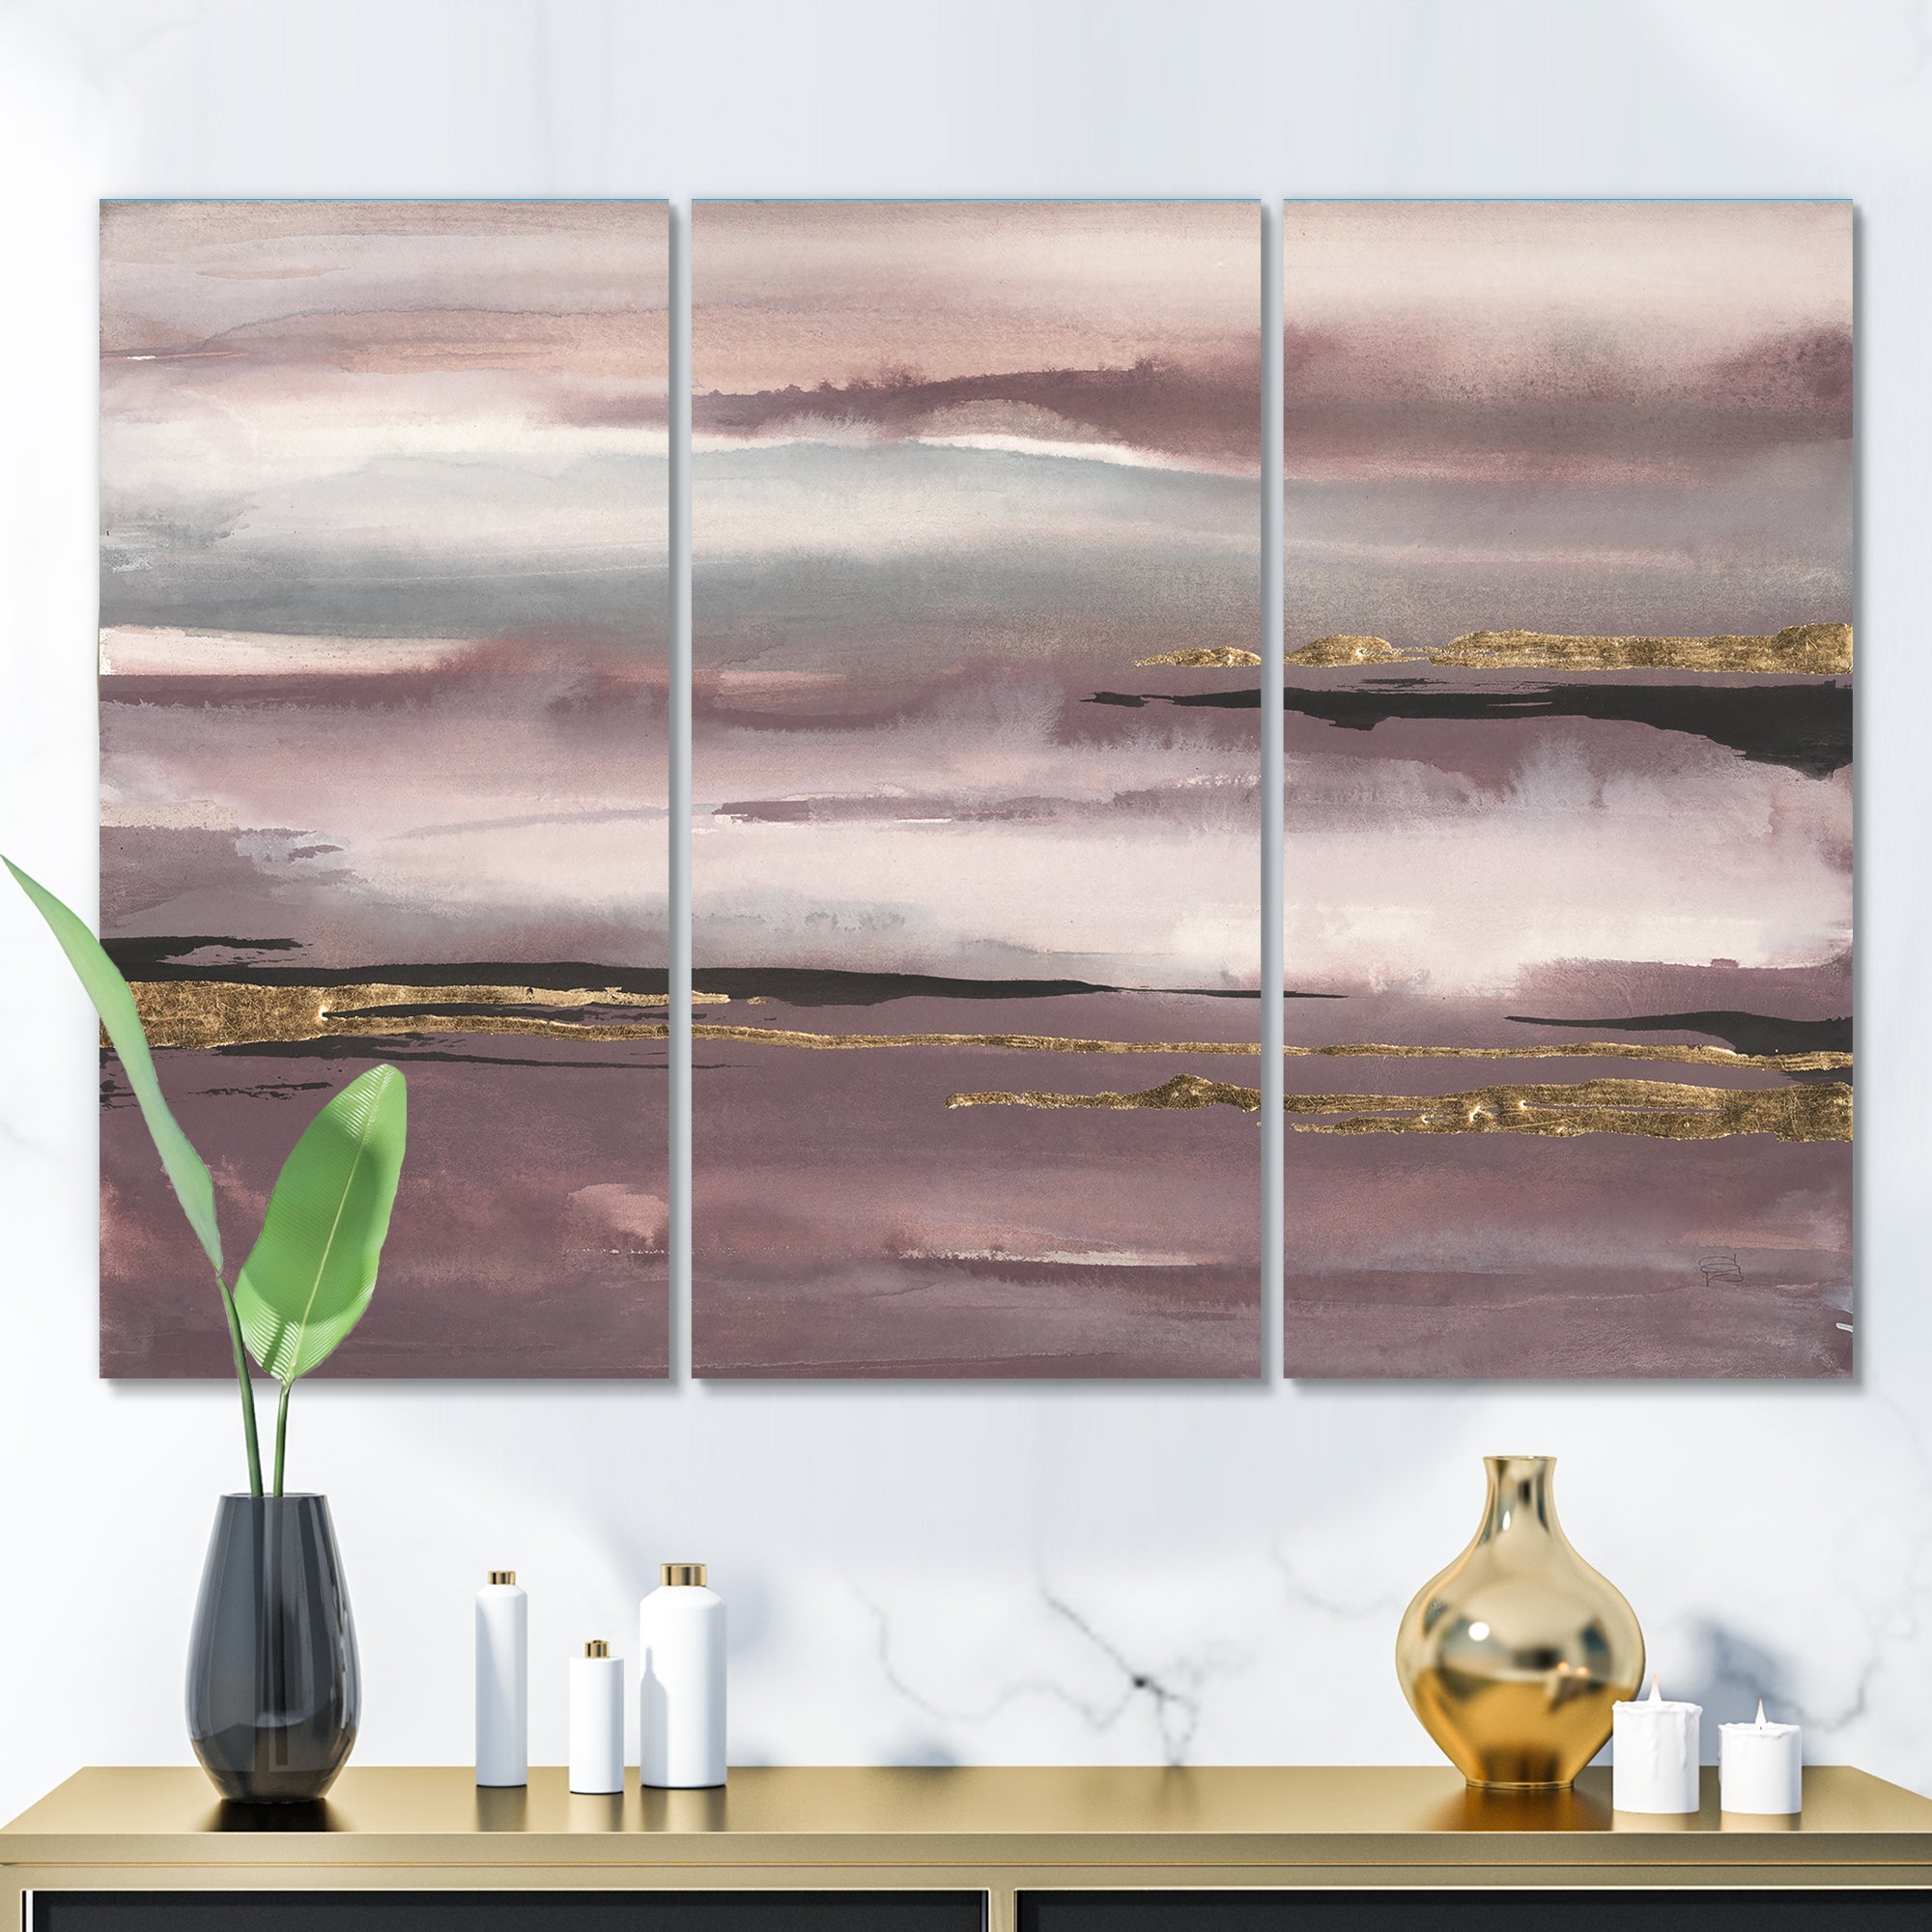 Purple Glam Storm IV Glam & Shabby Chic Gallery-wrapped Canvas - 36x28 - 3 Panels